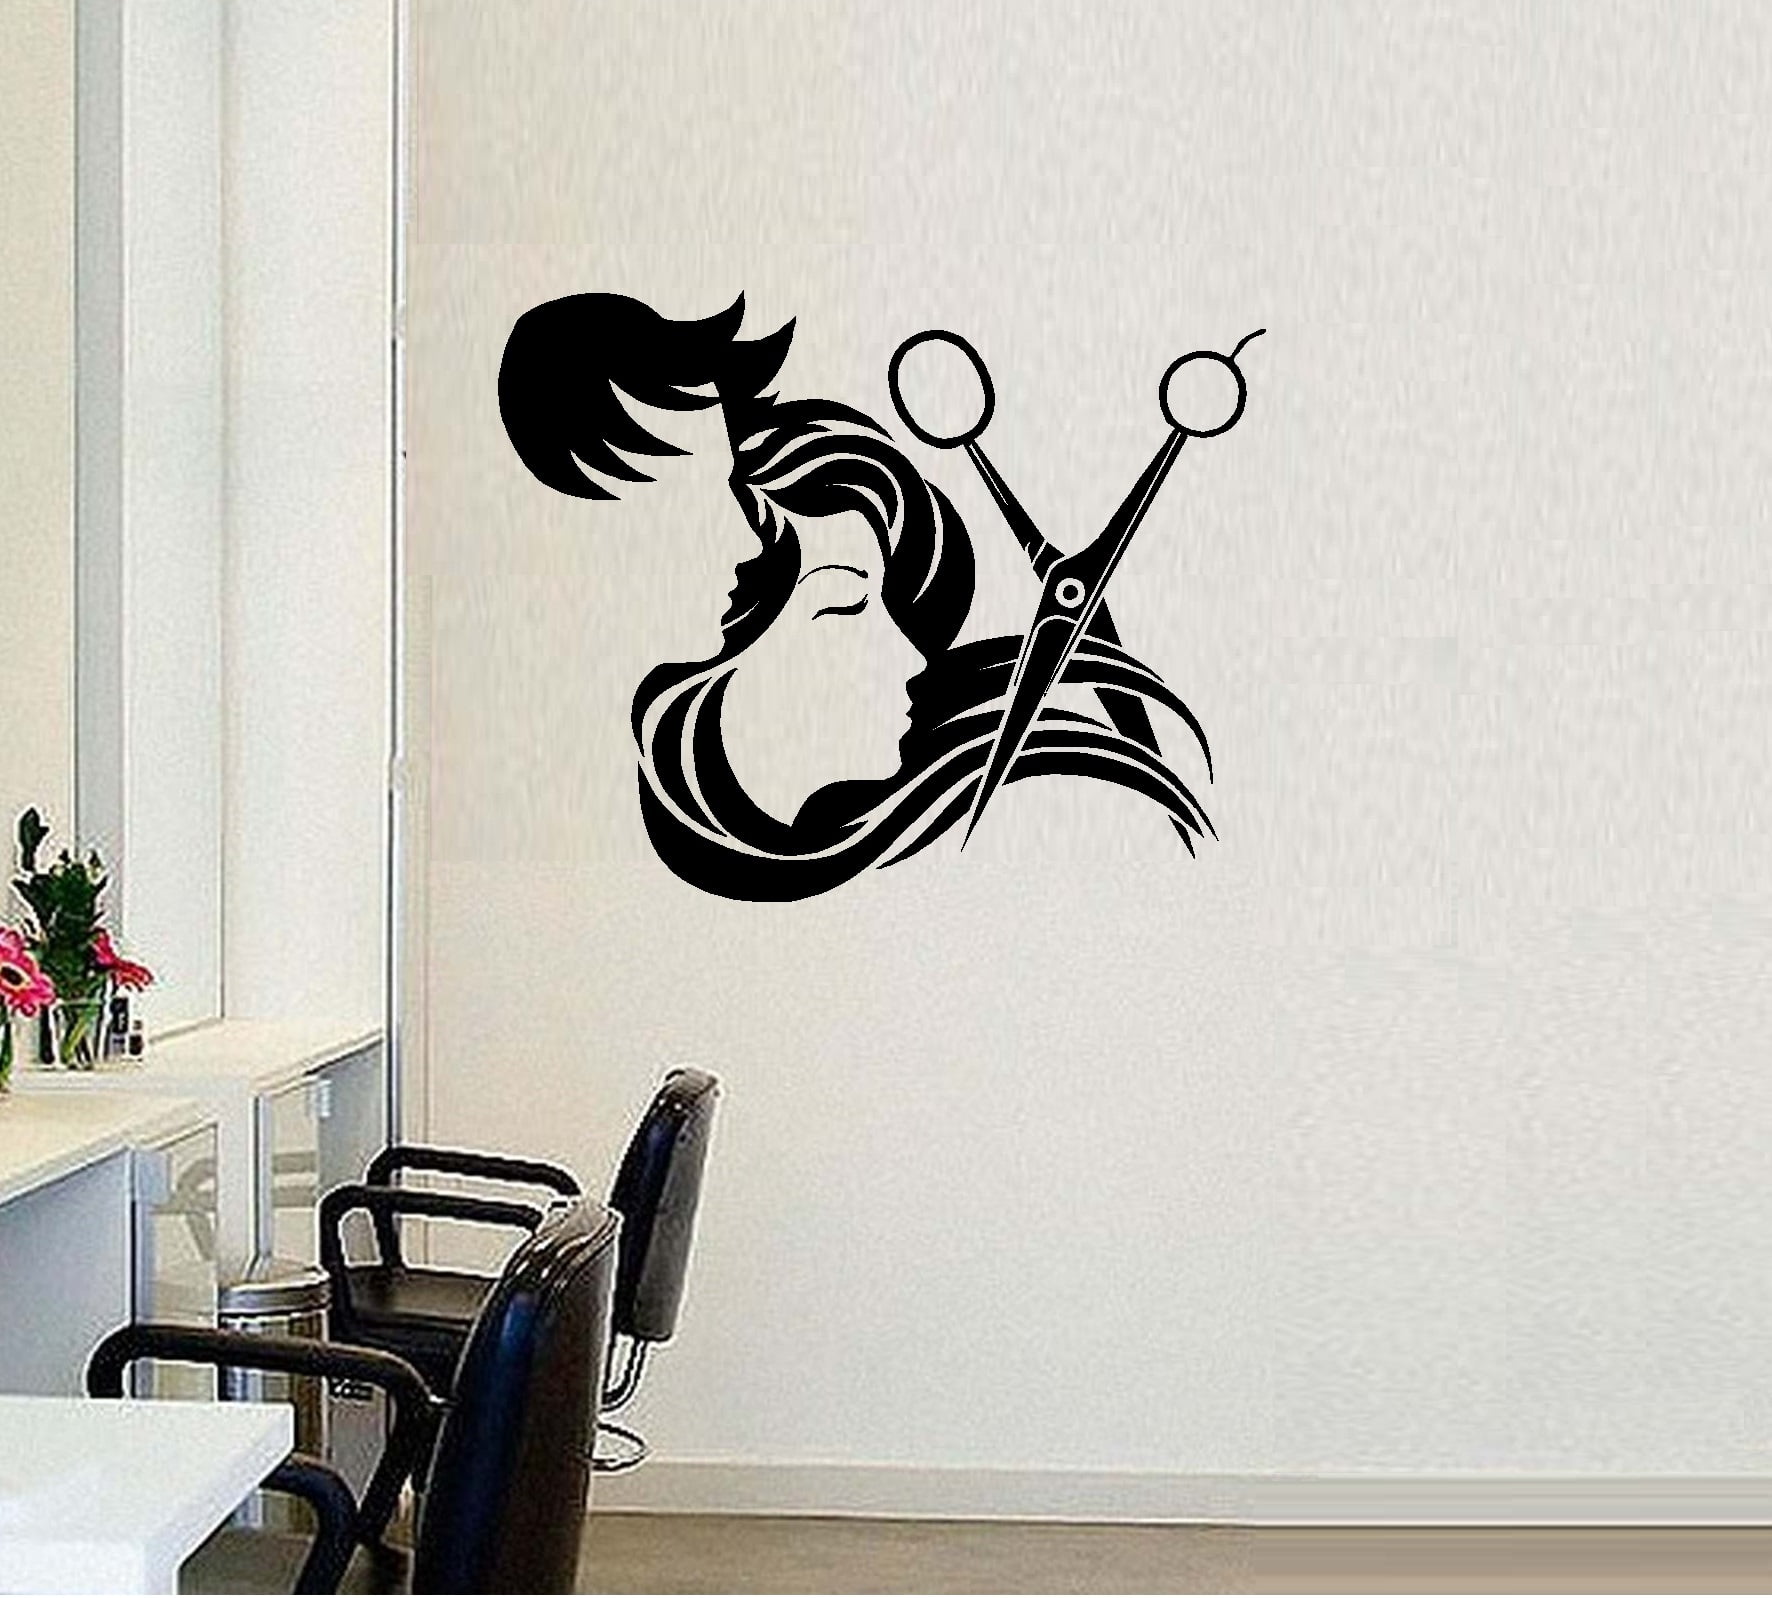 Details about   People will stare make it worth Wall Decal Quote Beauty Salon Decor Makeup C531